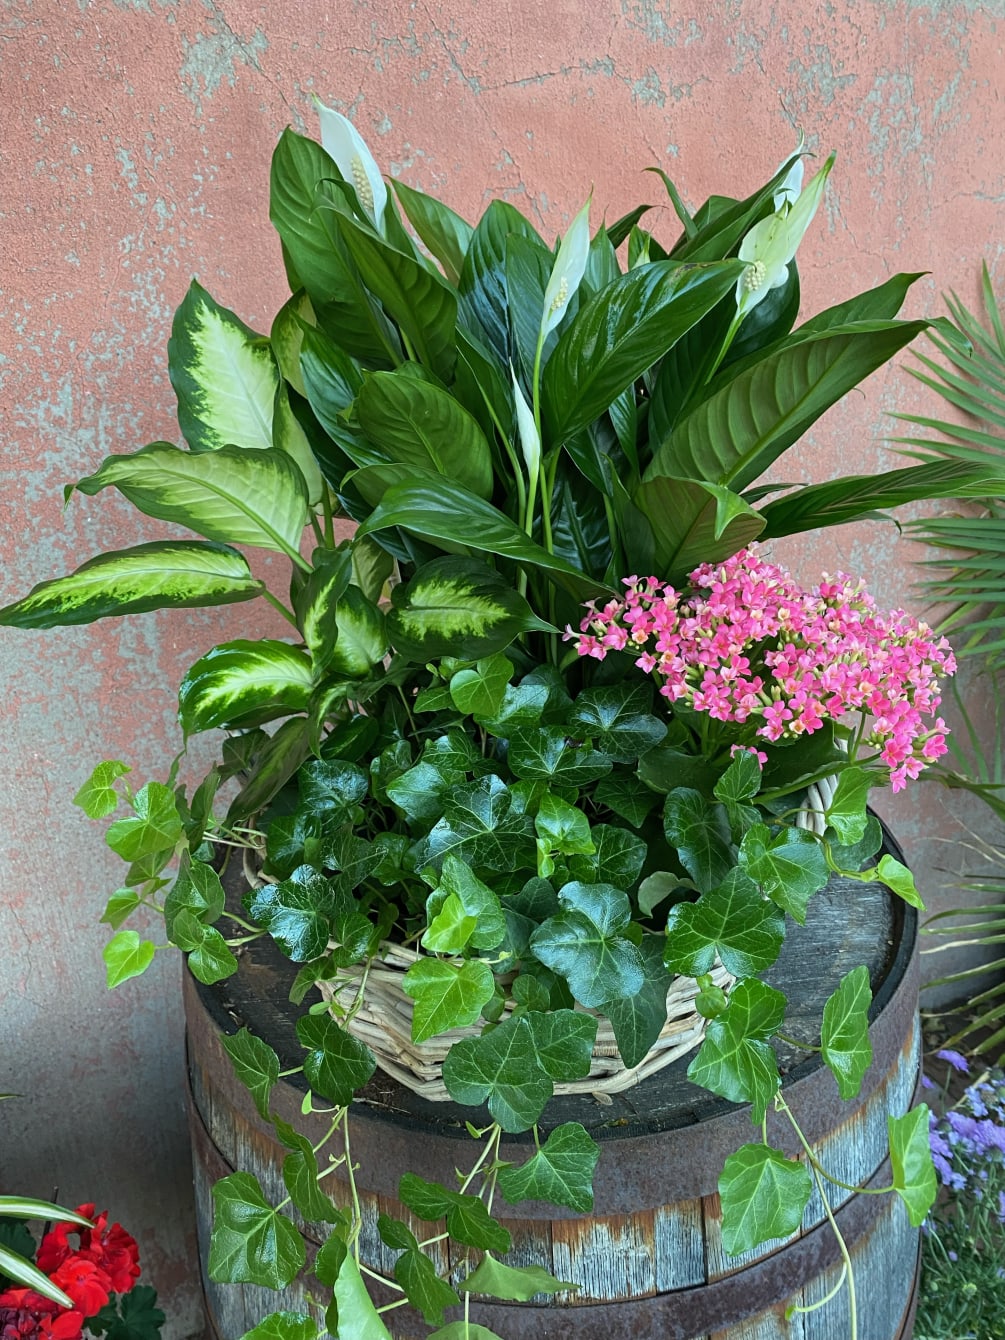 A nice combination of green and blooming plants in a attractive basket